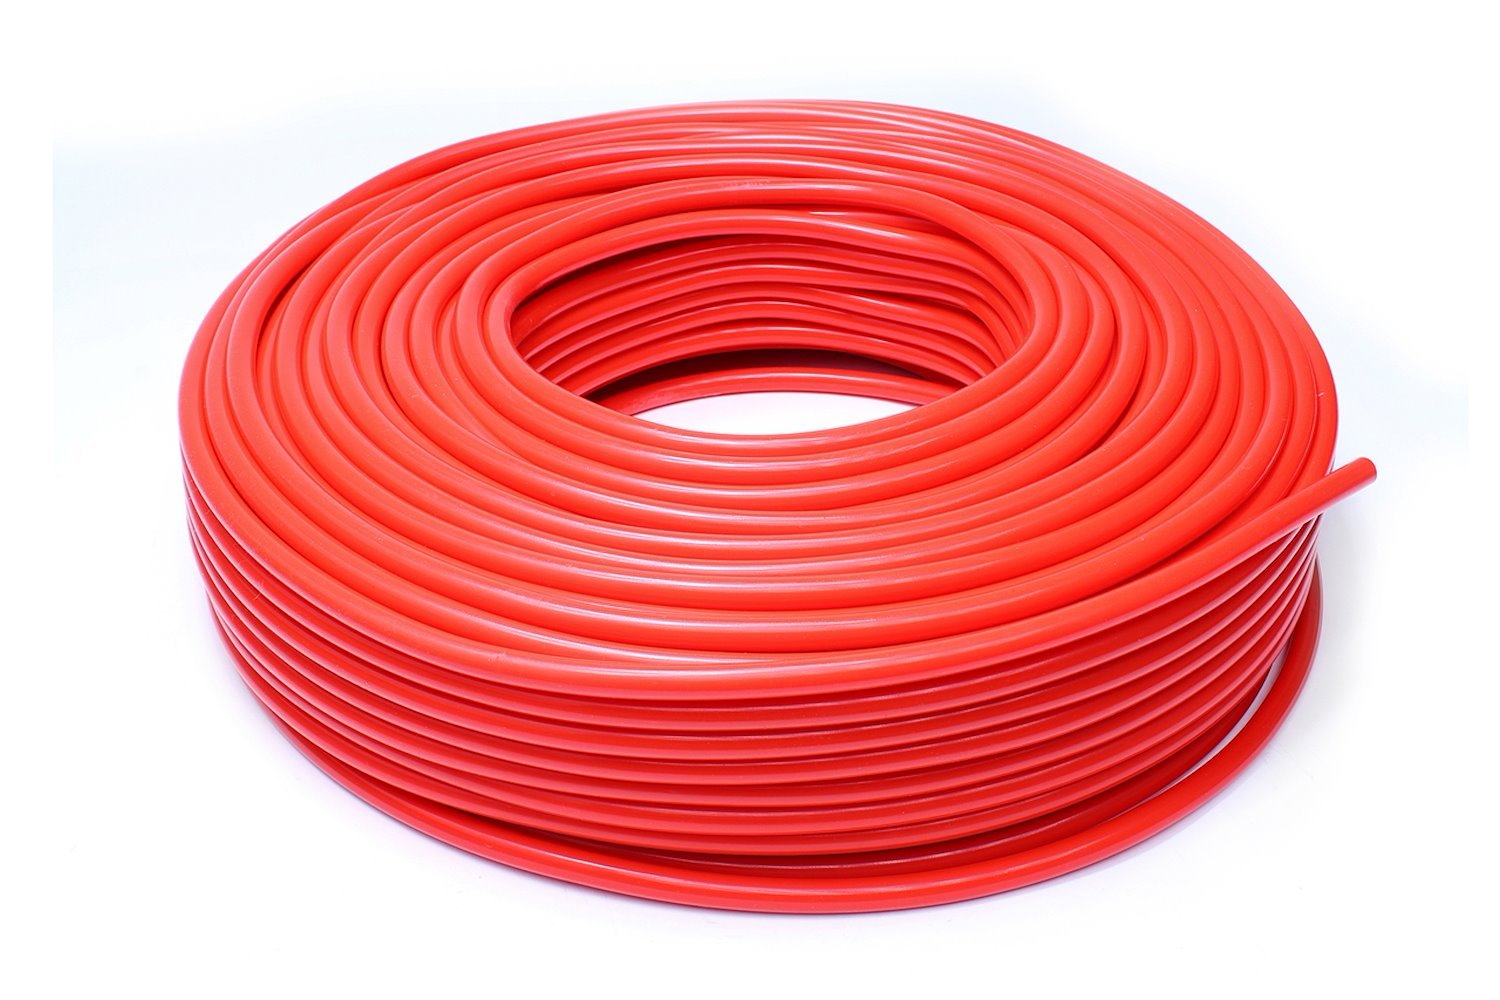 HTSVH95-REDx50 High-Temperature Silicone Vacuum Hose Tubing, 3/8 in. ID, 50 ft. Roll, Red